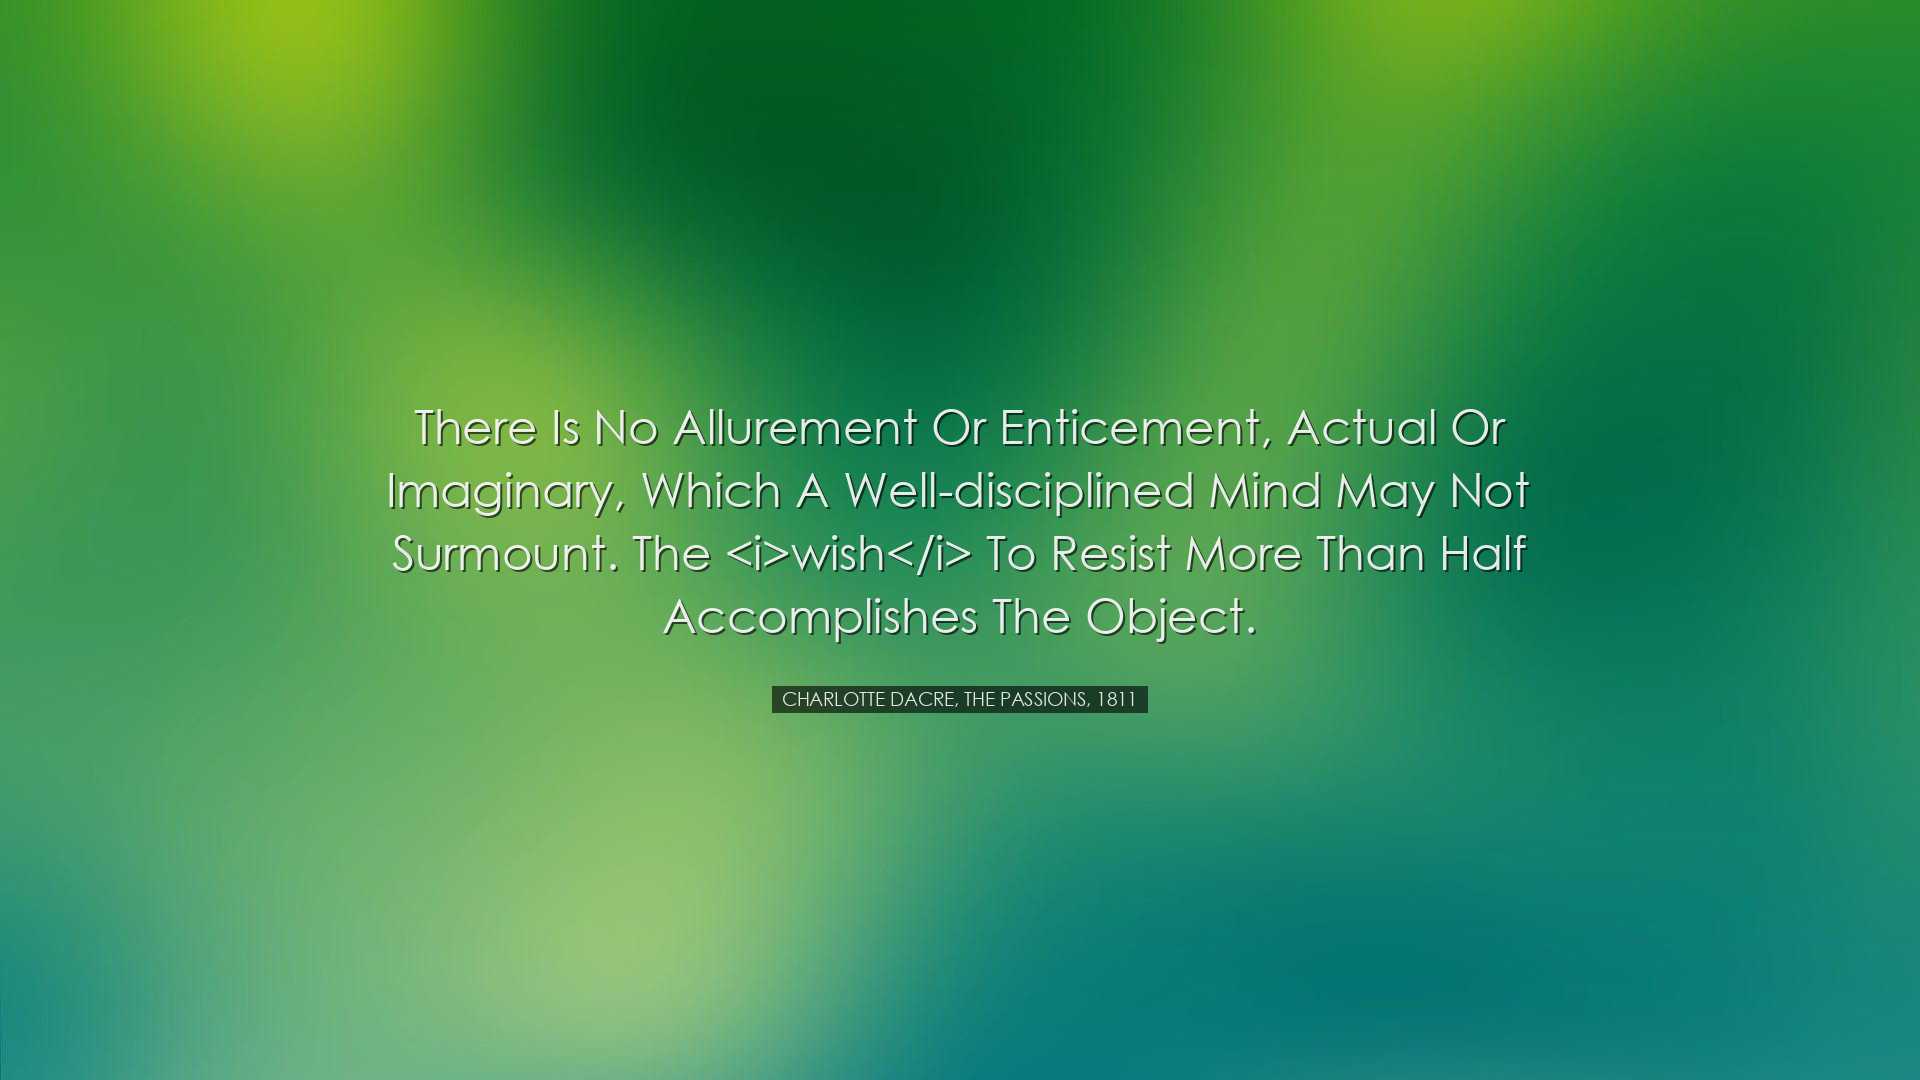 There is no allurement or enticement, actual or imaginary, which a